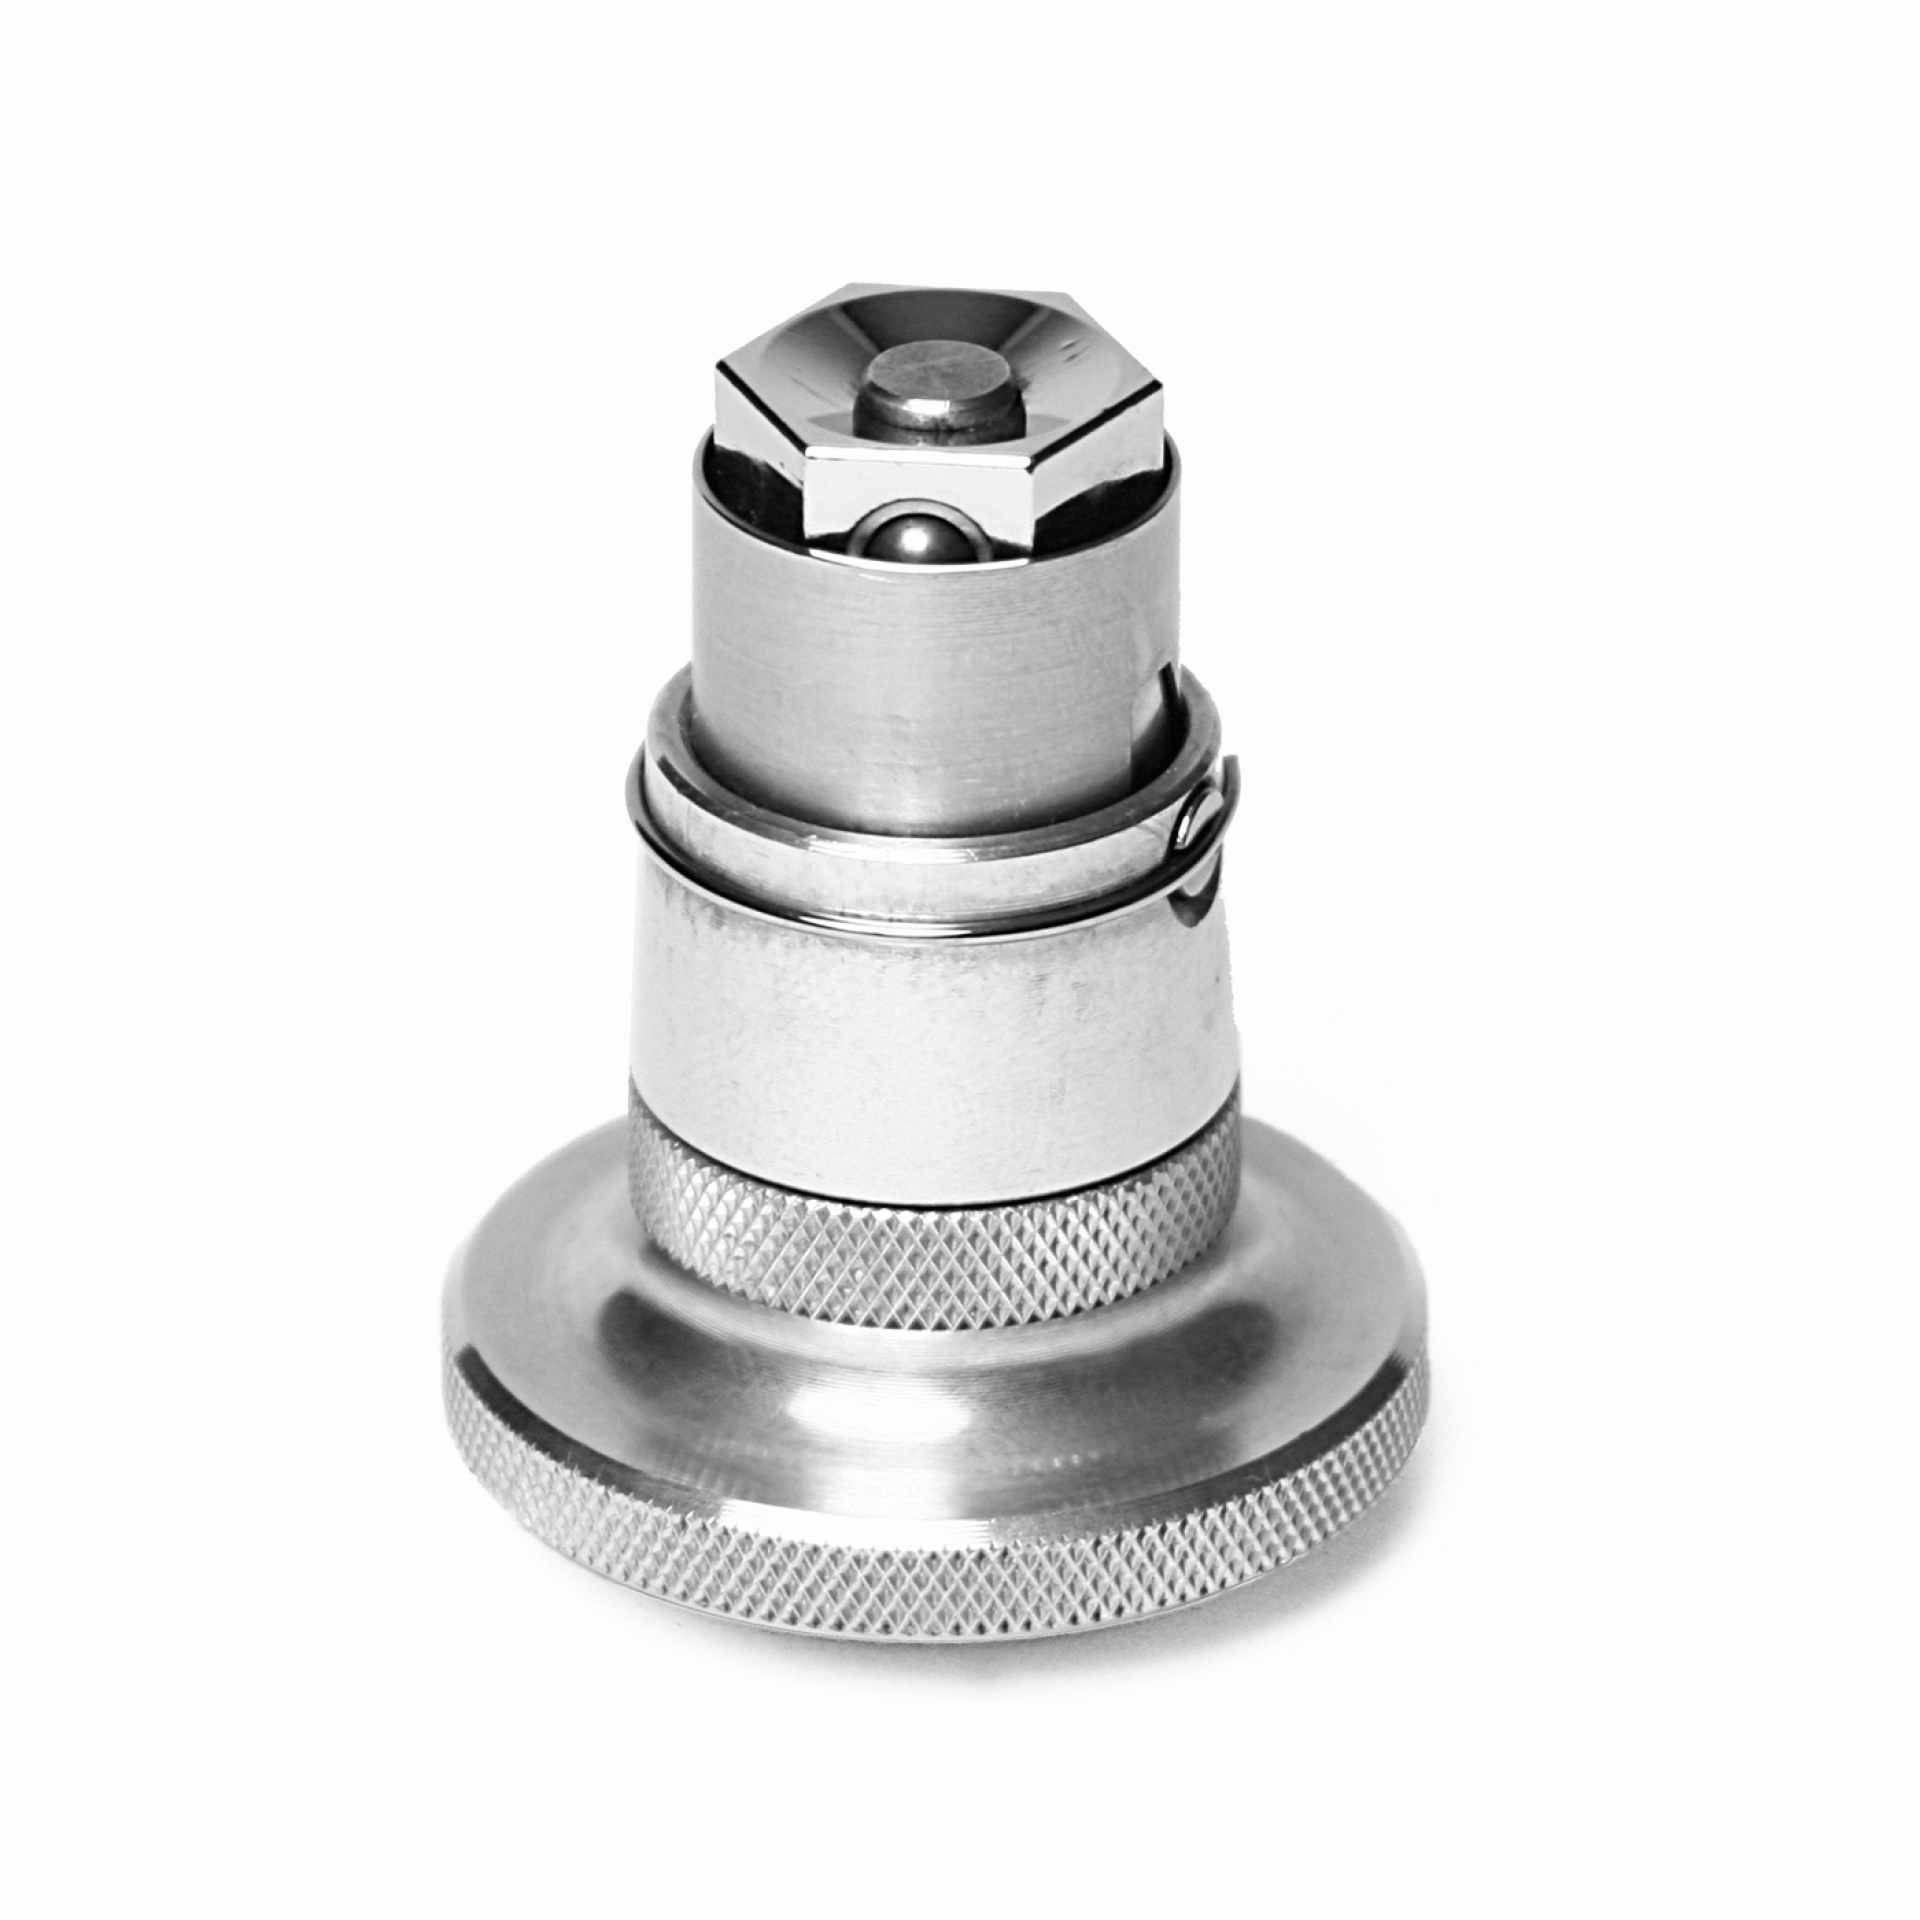 3M Company | 05752 | Quick Connect Adapter 5/8" Thread